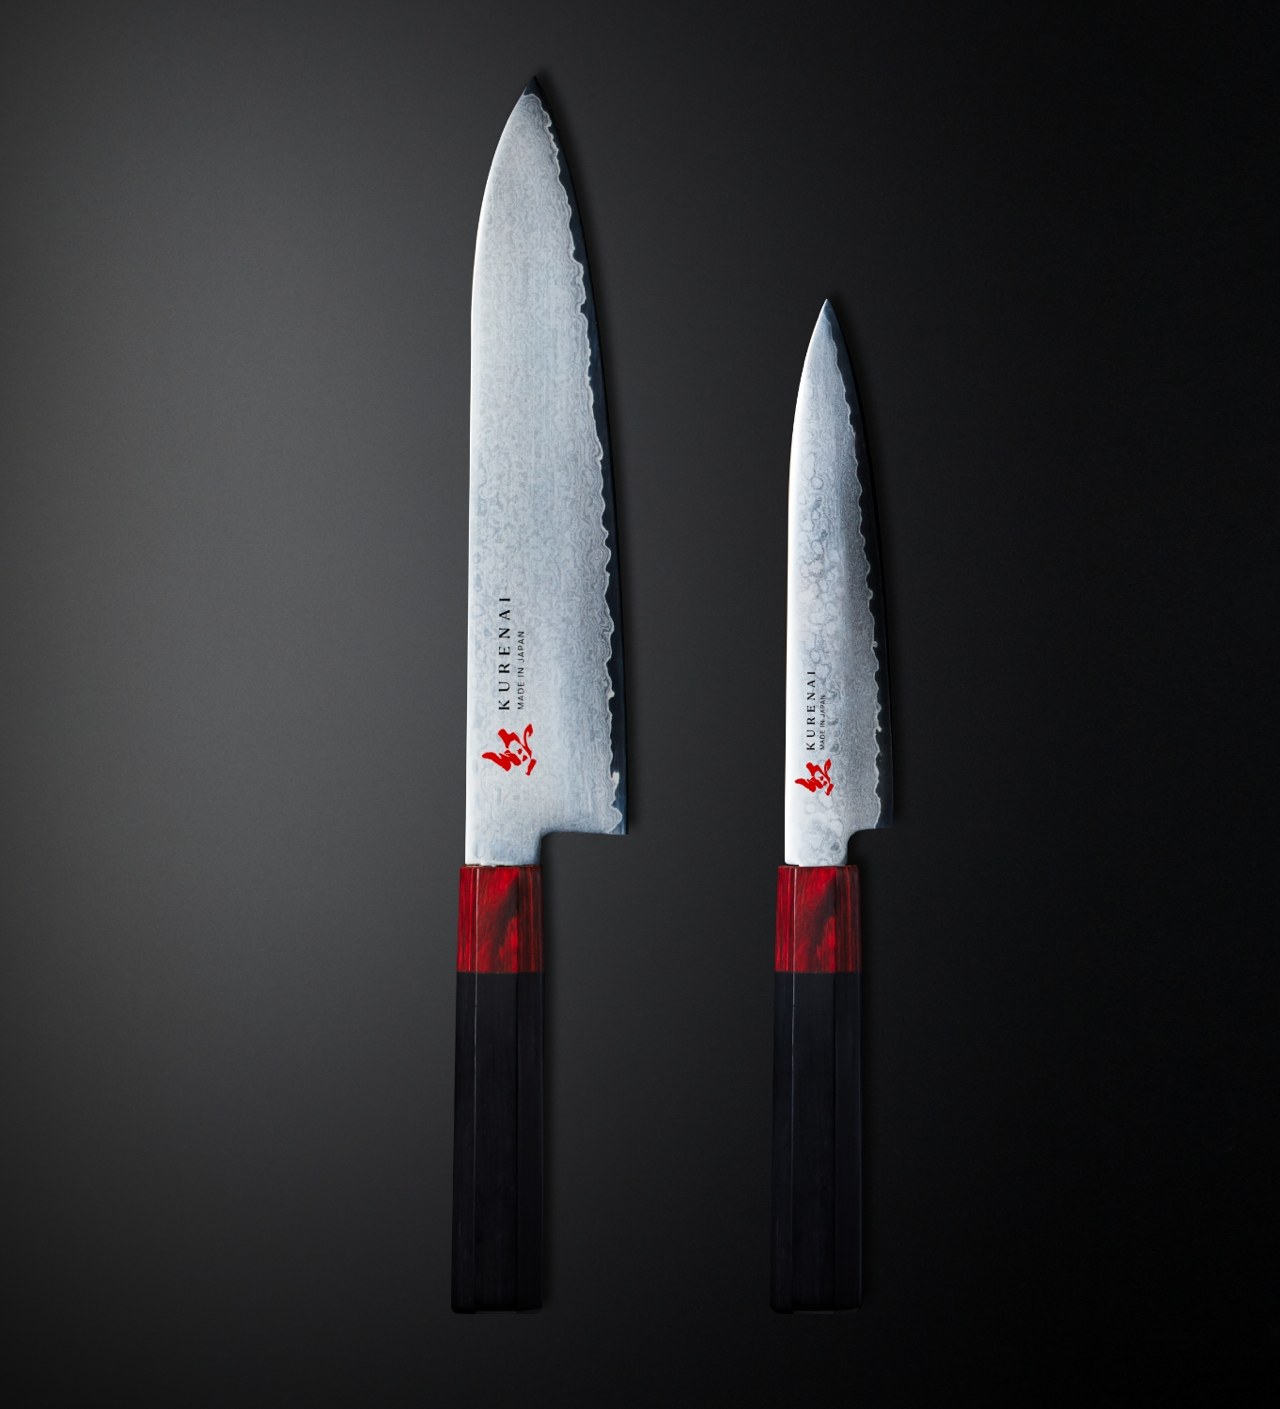 Feel like a ninja master in the kitchen with these black kitchen knives -  Yanko Design